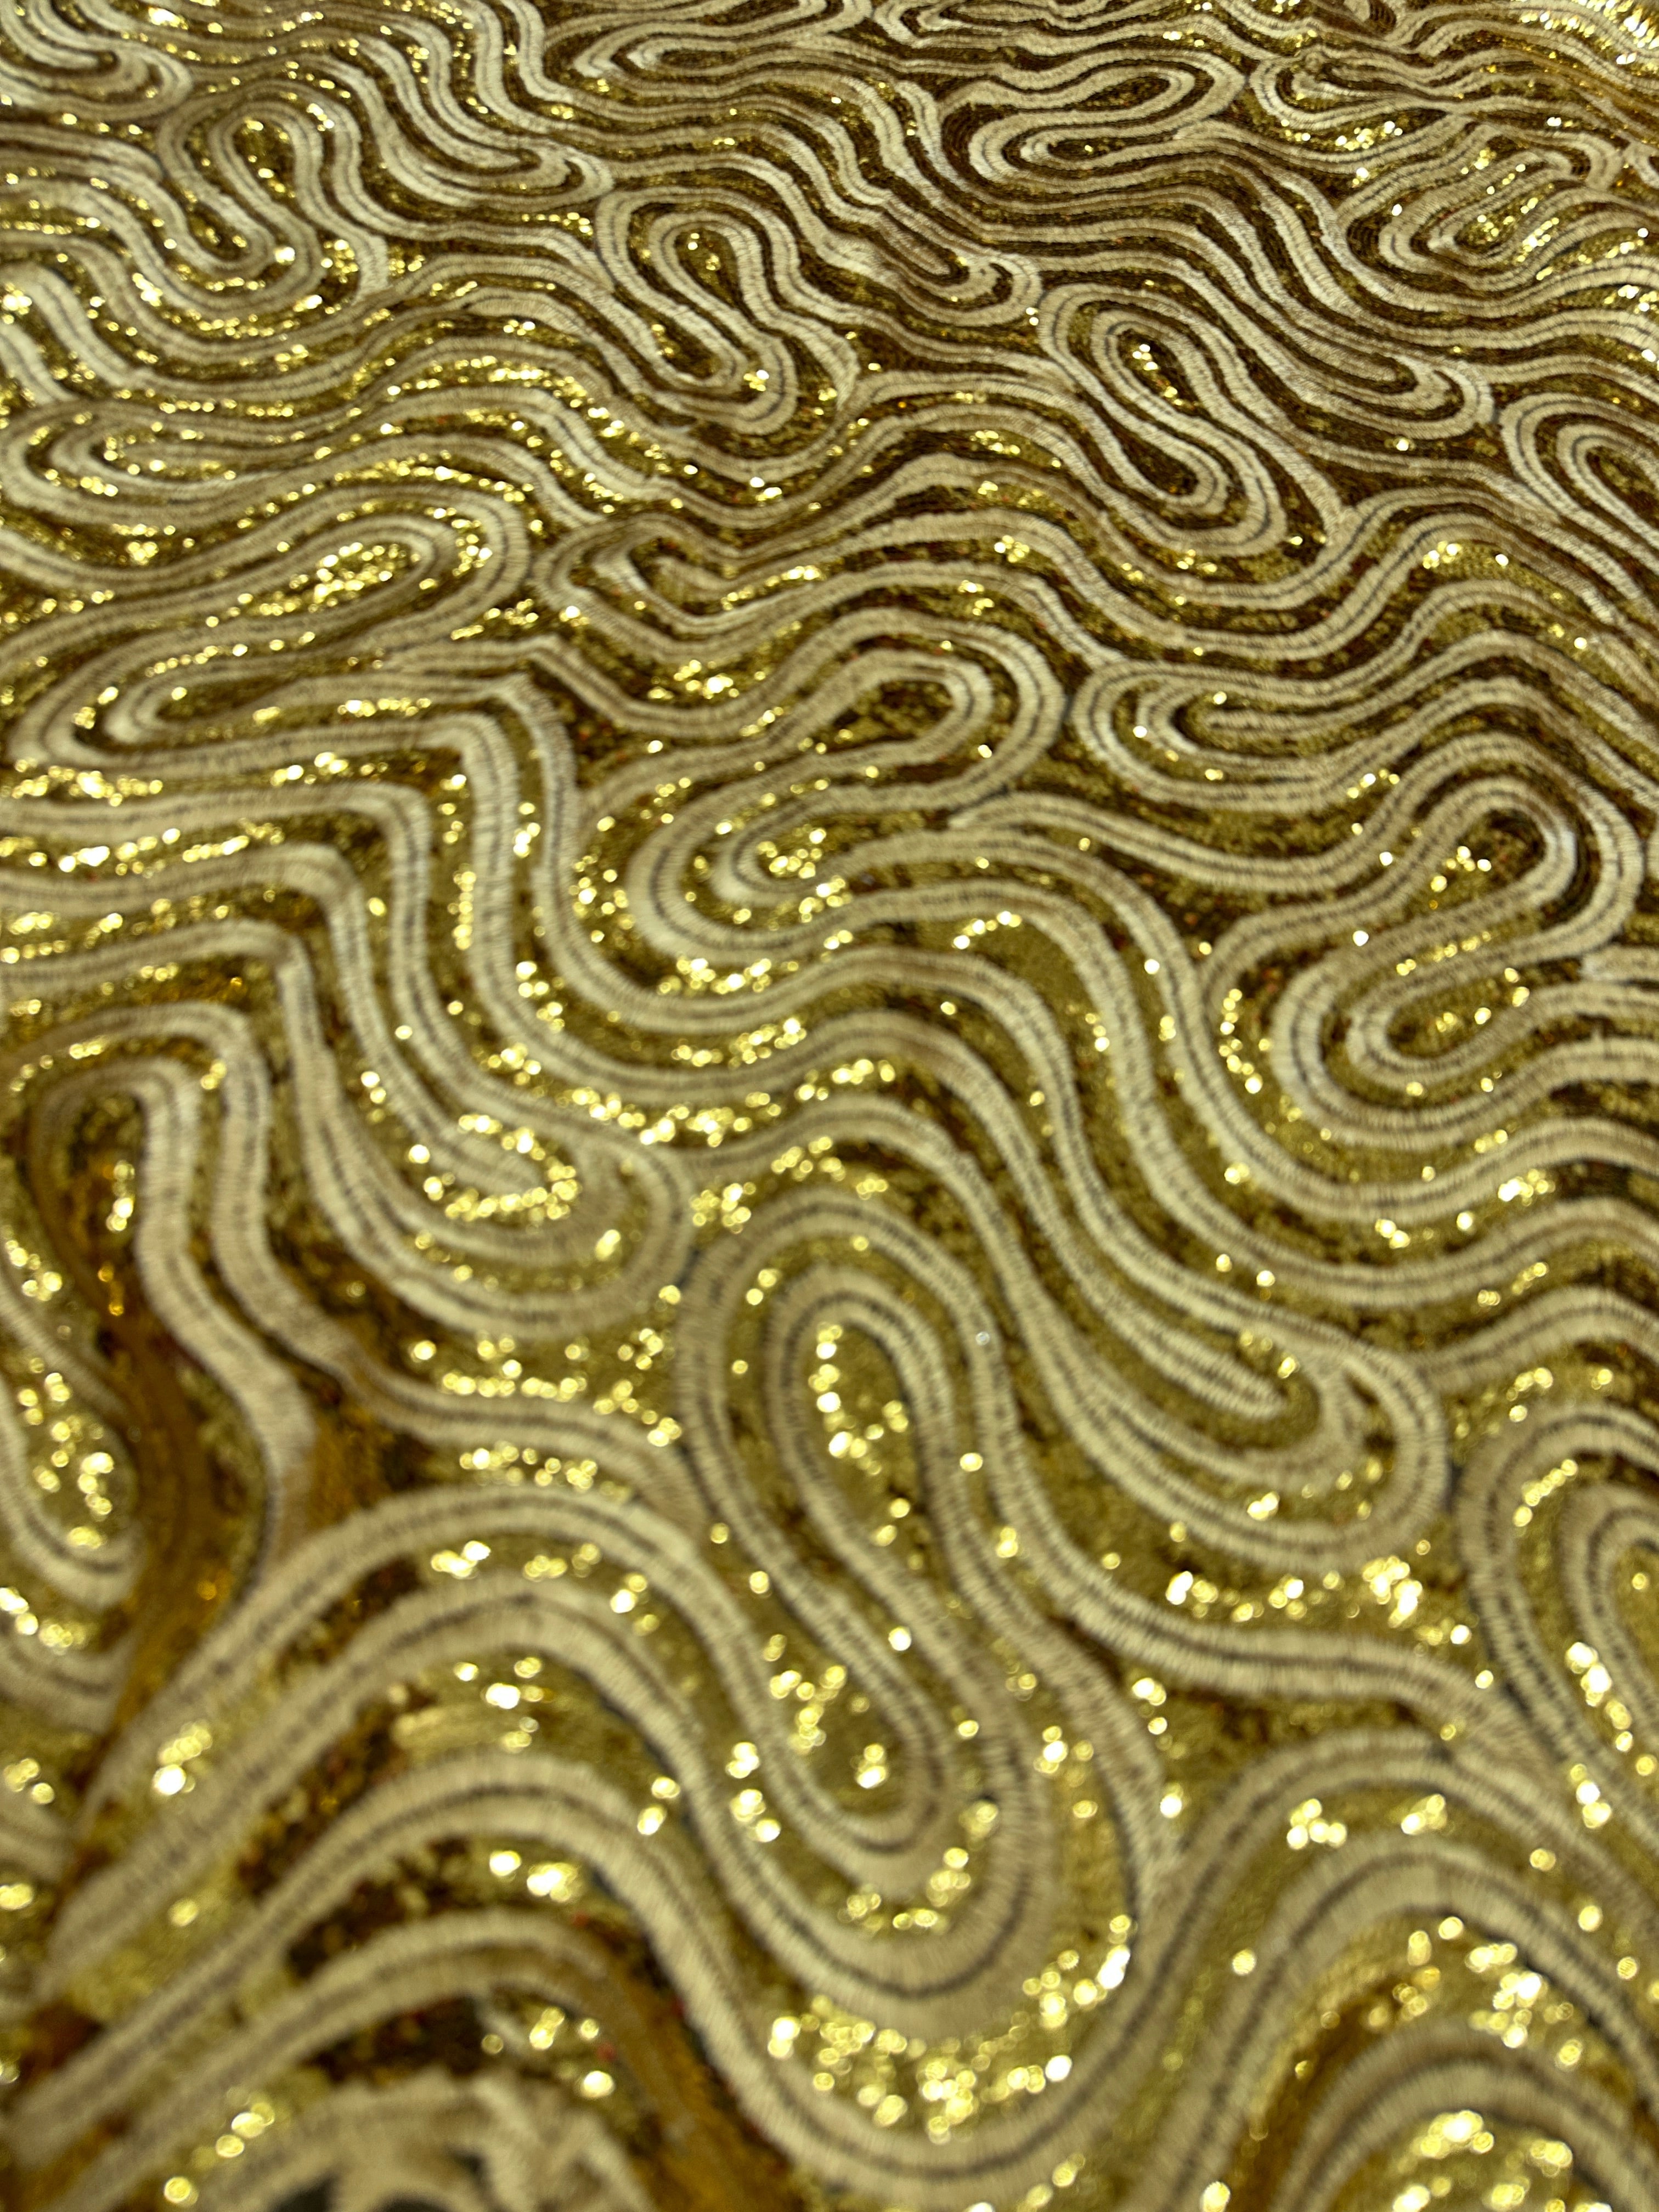 bridal lace fabric cheap, gold lace, Gold Sequin Embroidered Lace, bridal lace, lace fabric for prom dress, border lace fabric, gown lace fabric, luxury lace, lace fabric, glitter lace, buy lace online, discounted embriodered lace